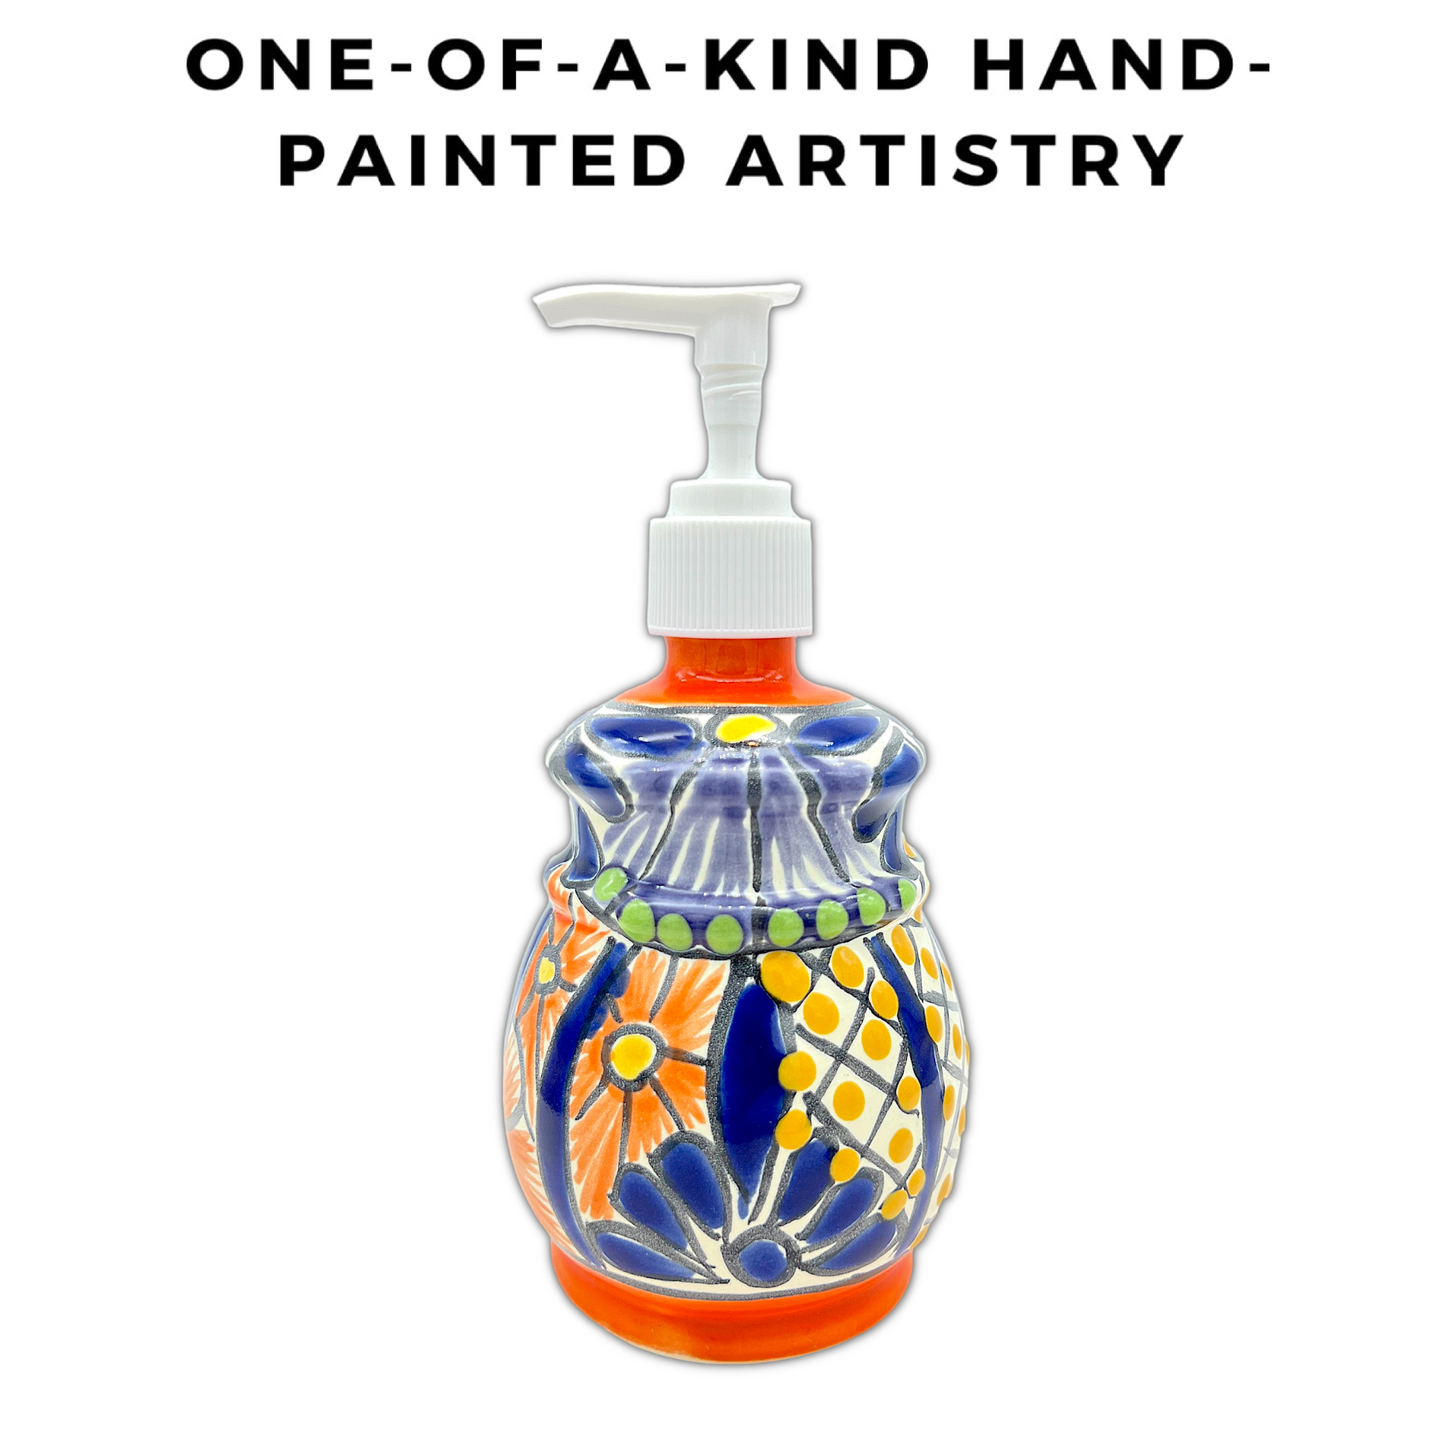 one of a kind A multicolored, bell design, hand-painted Talavera ceramic soap dispenser sourced from skilled Mexican artisans.